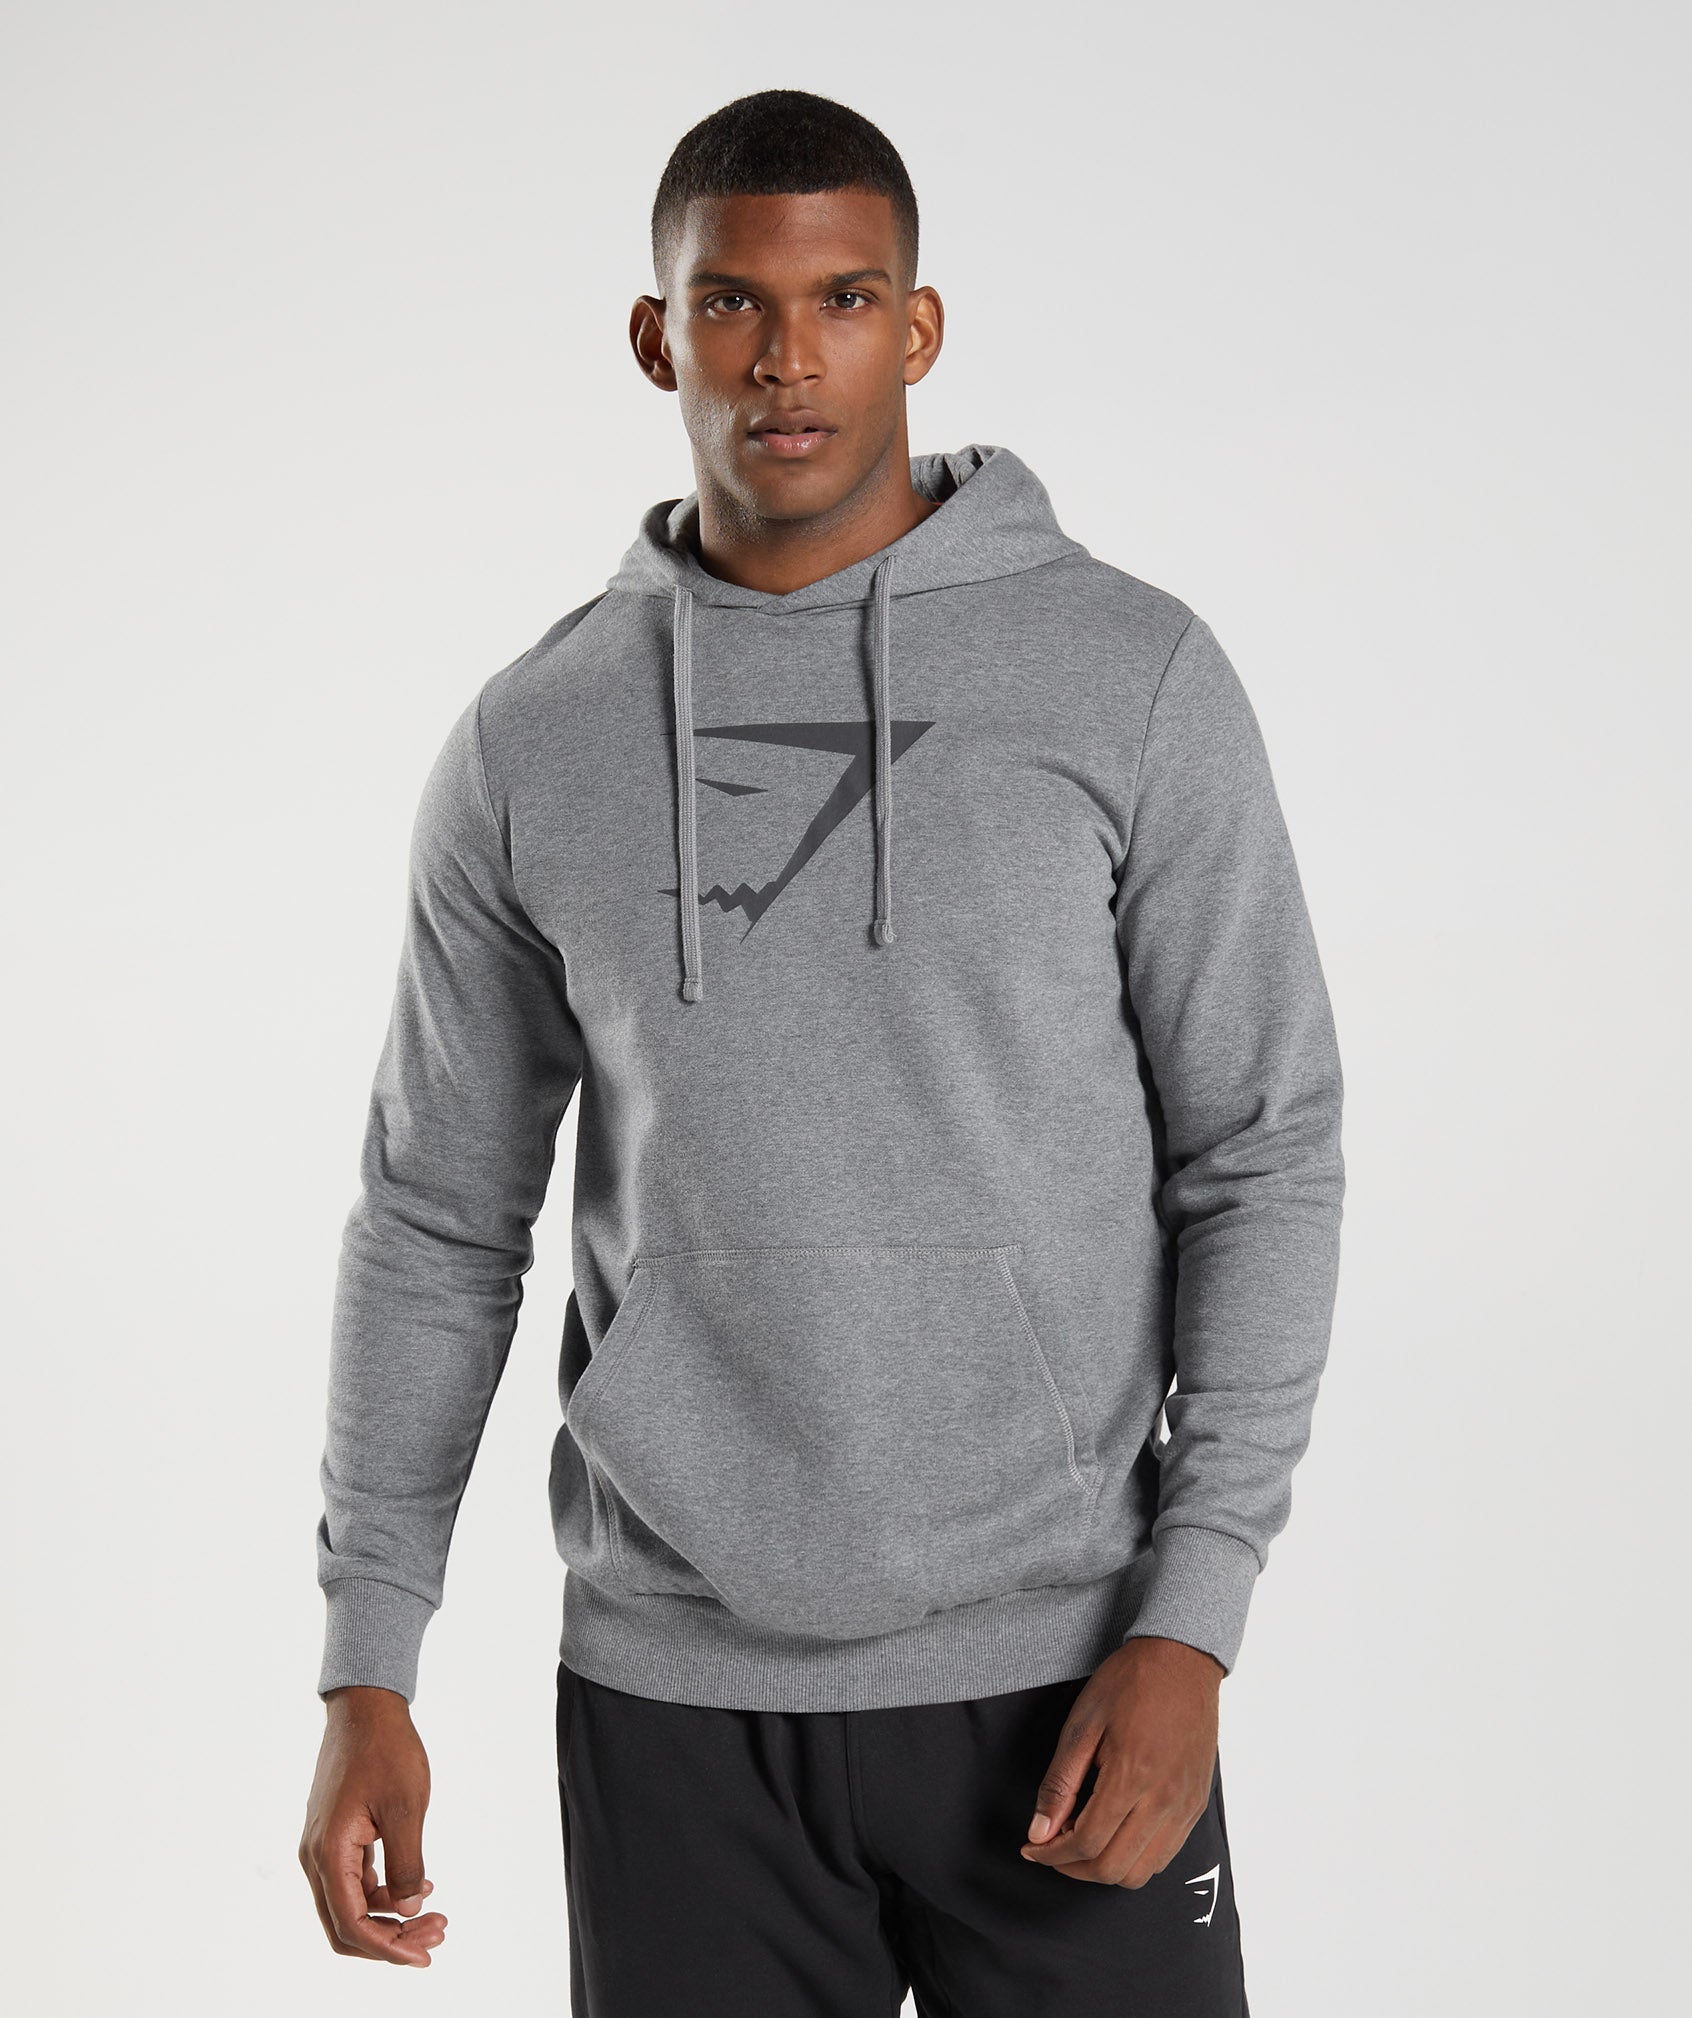 Sharkhead Infill Hoodie in Charcoal Grey Marl - view 1